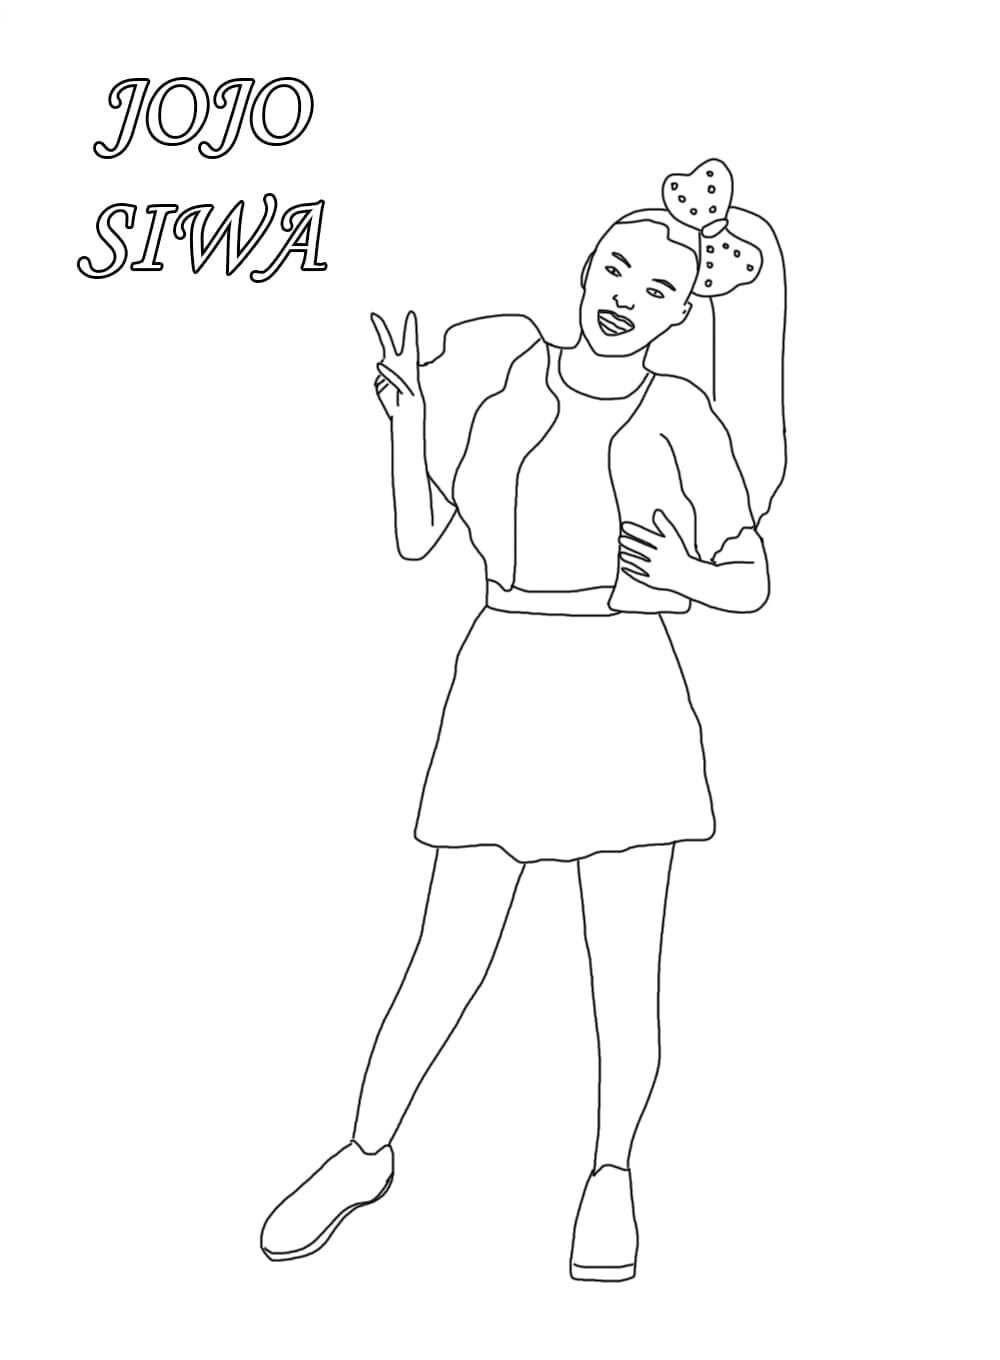 Jojo Siwa shows victory fingers Coloring Page